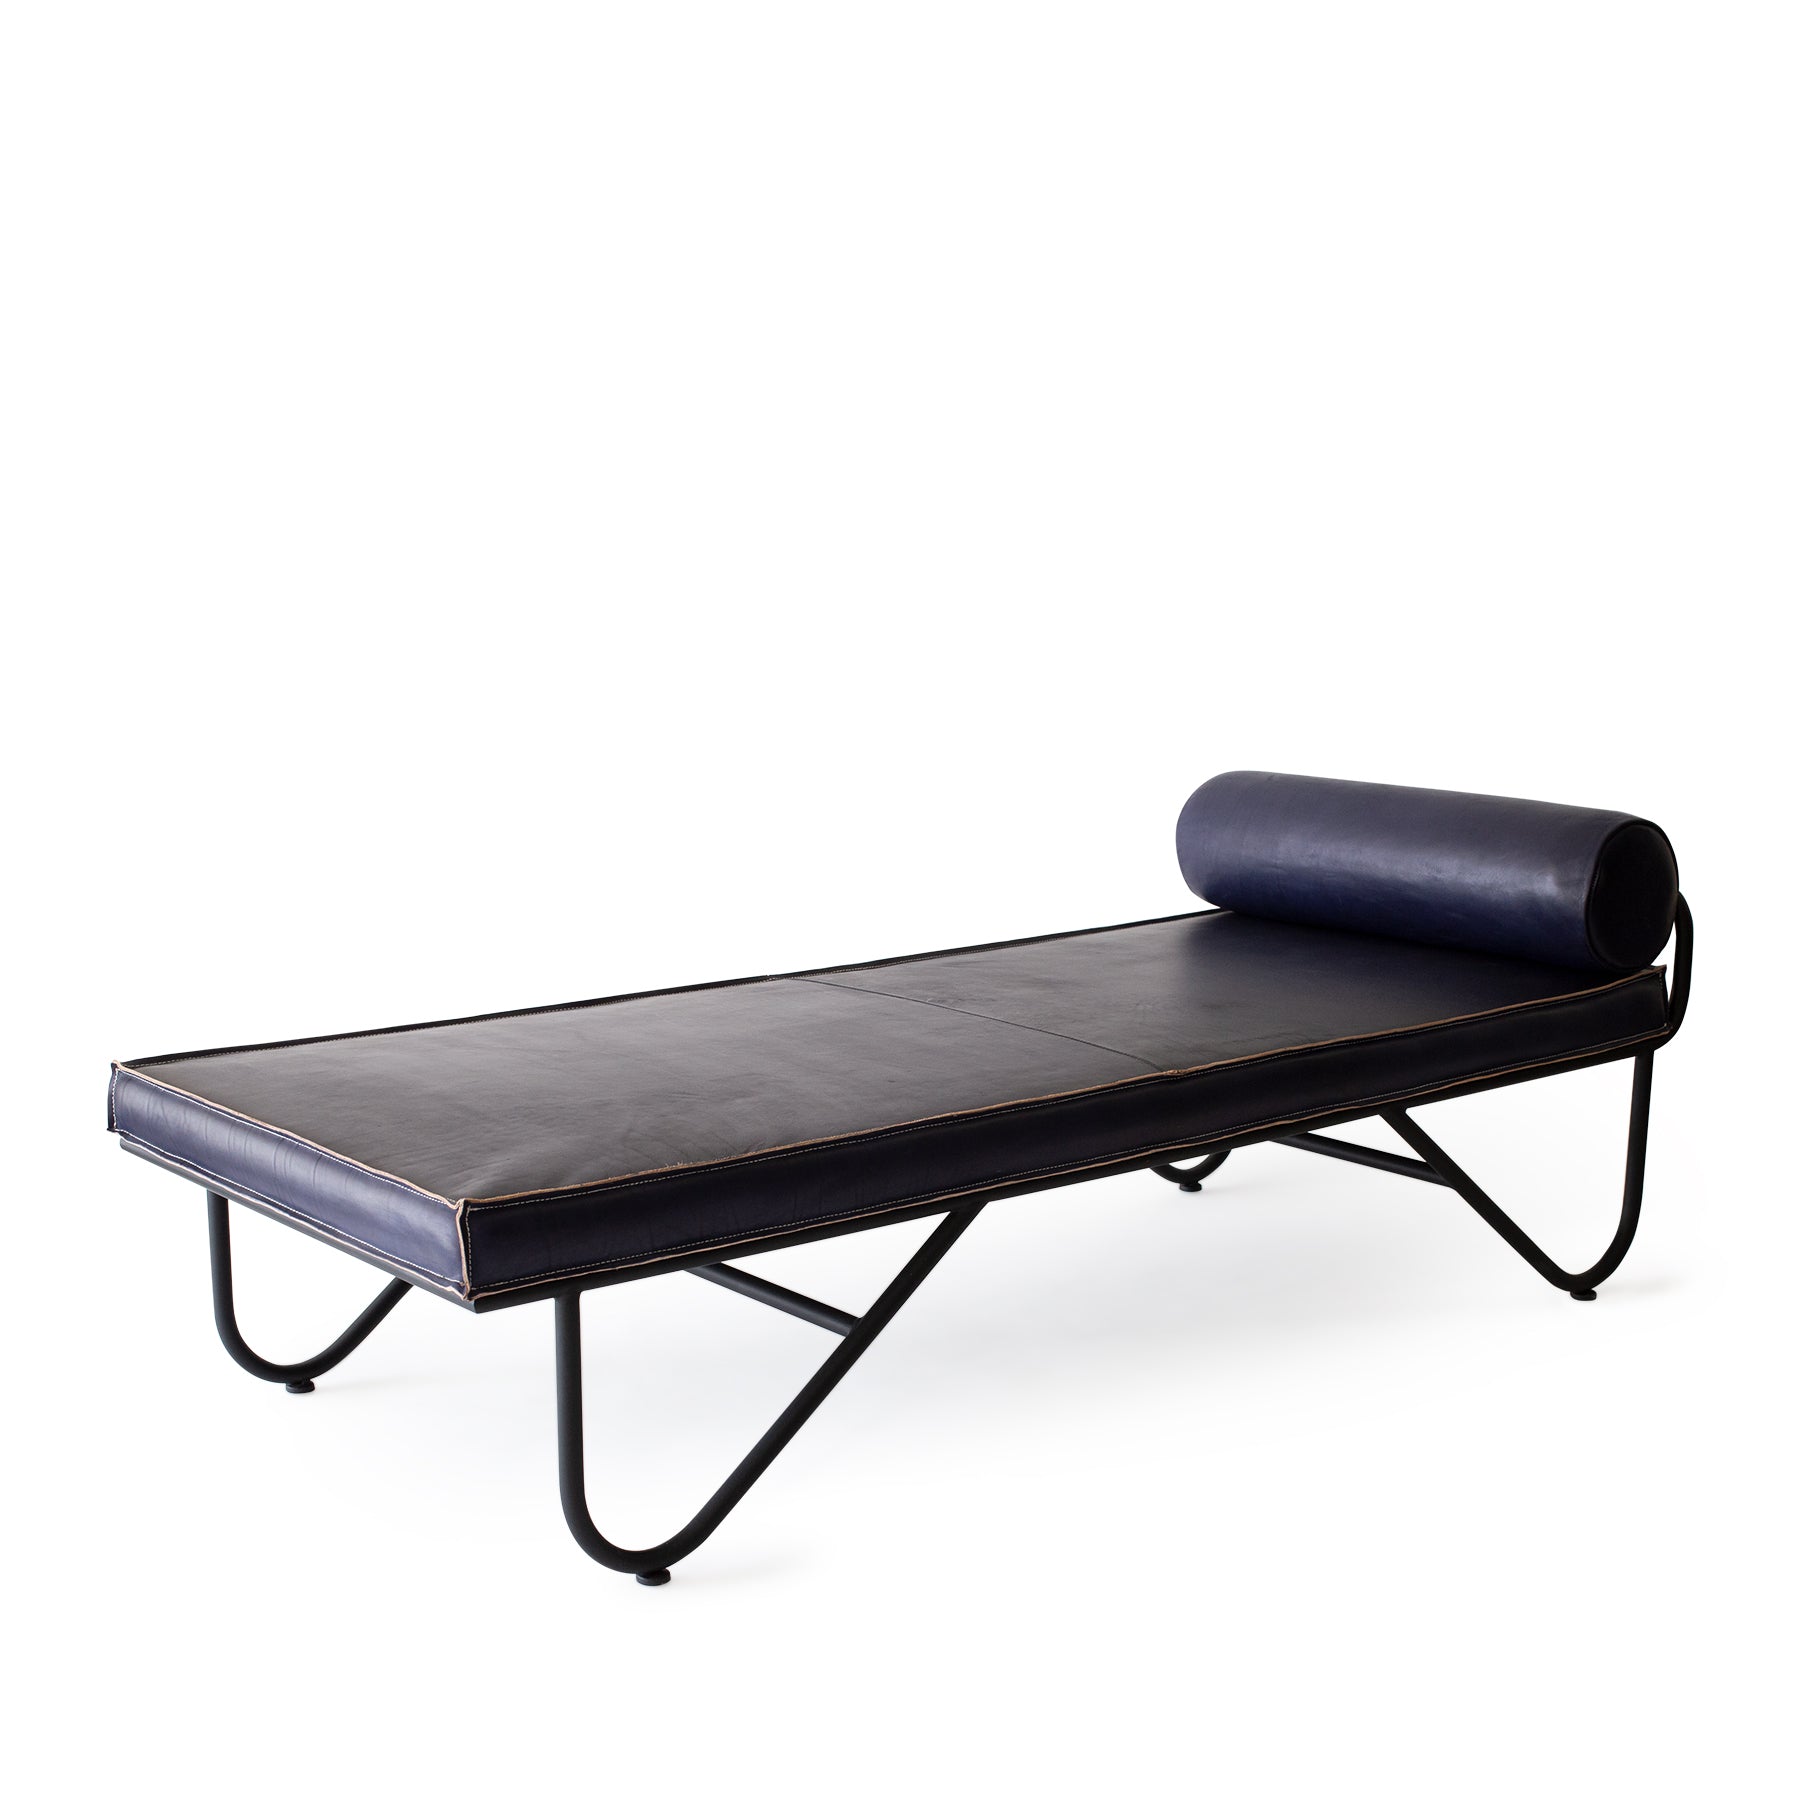 Saddle Leather Chaise in Blue with Dash Black Base Zoom Image 1